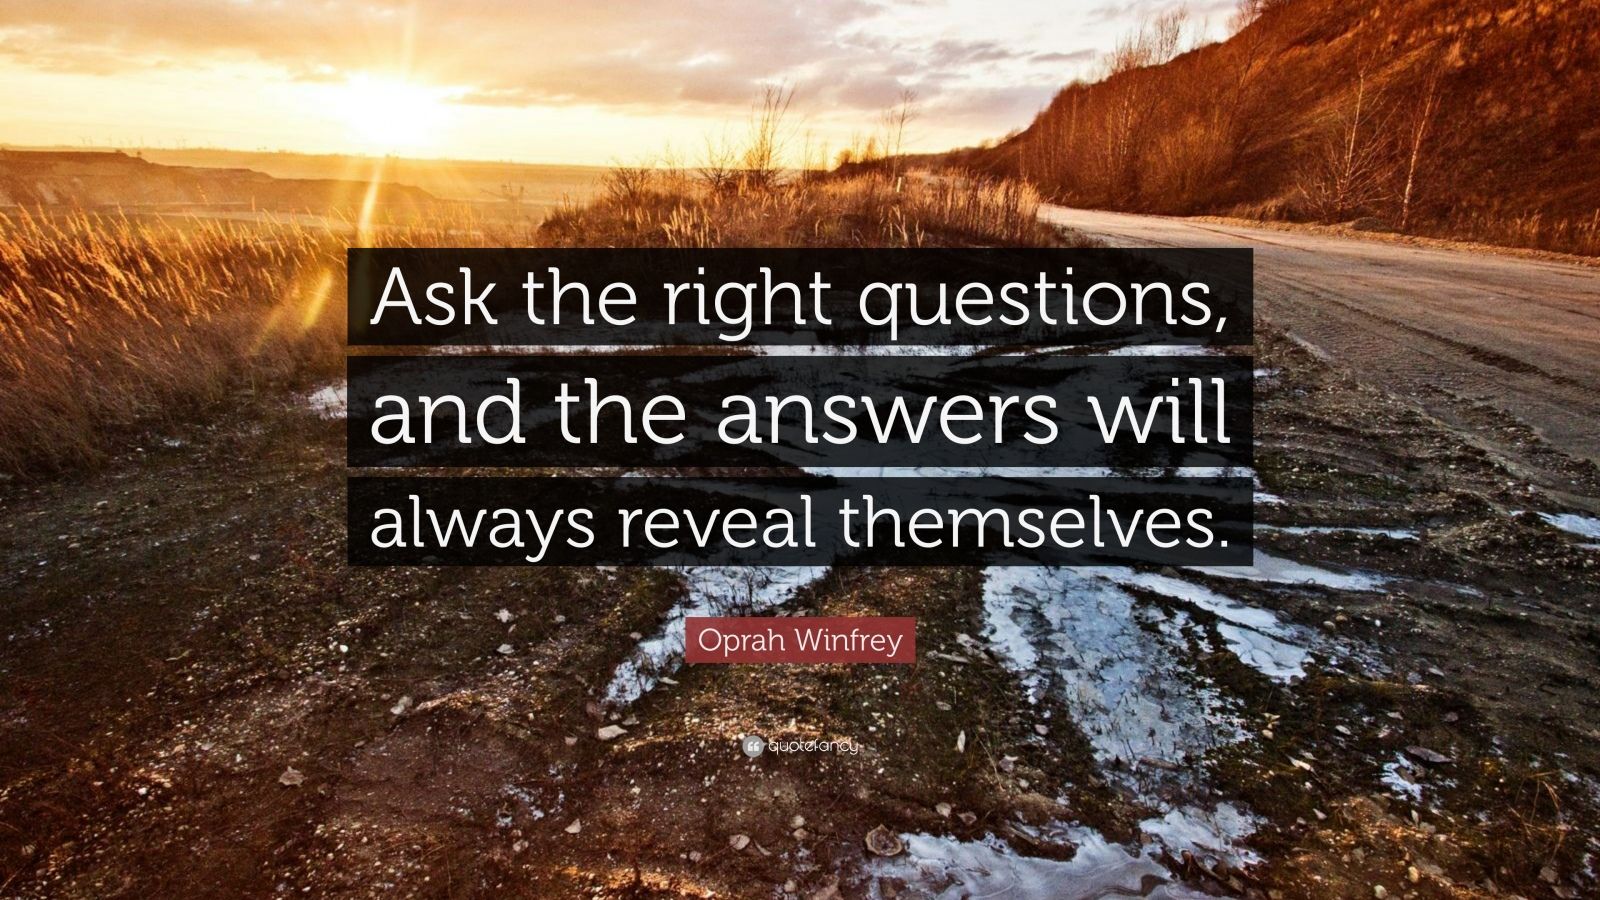 Oprah Winfrey Quote: “Ask the right questions, and the answers will ...